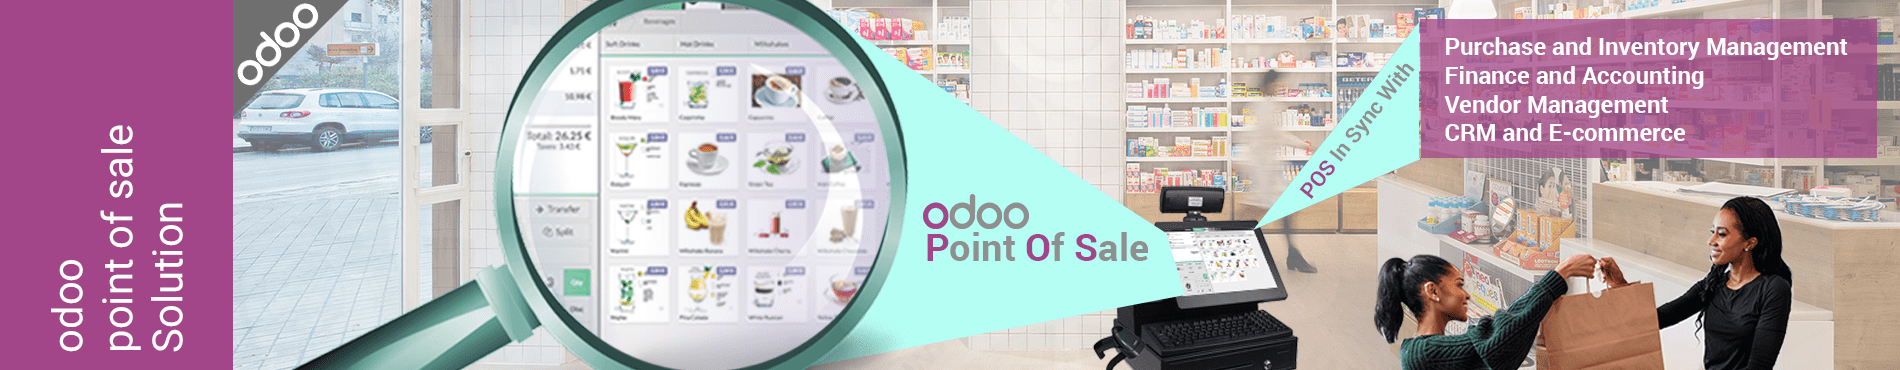 odoo Point of sale